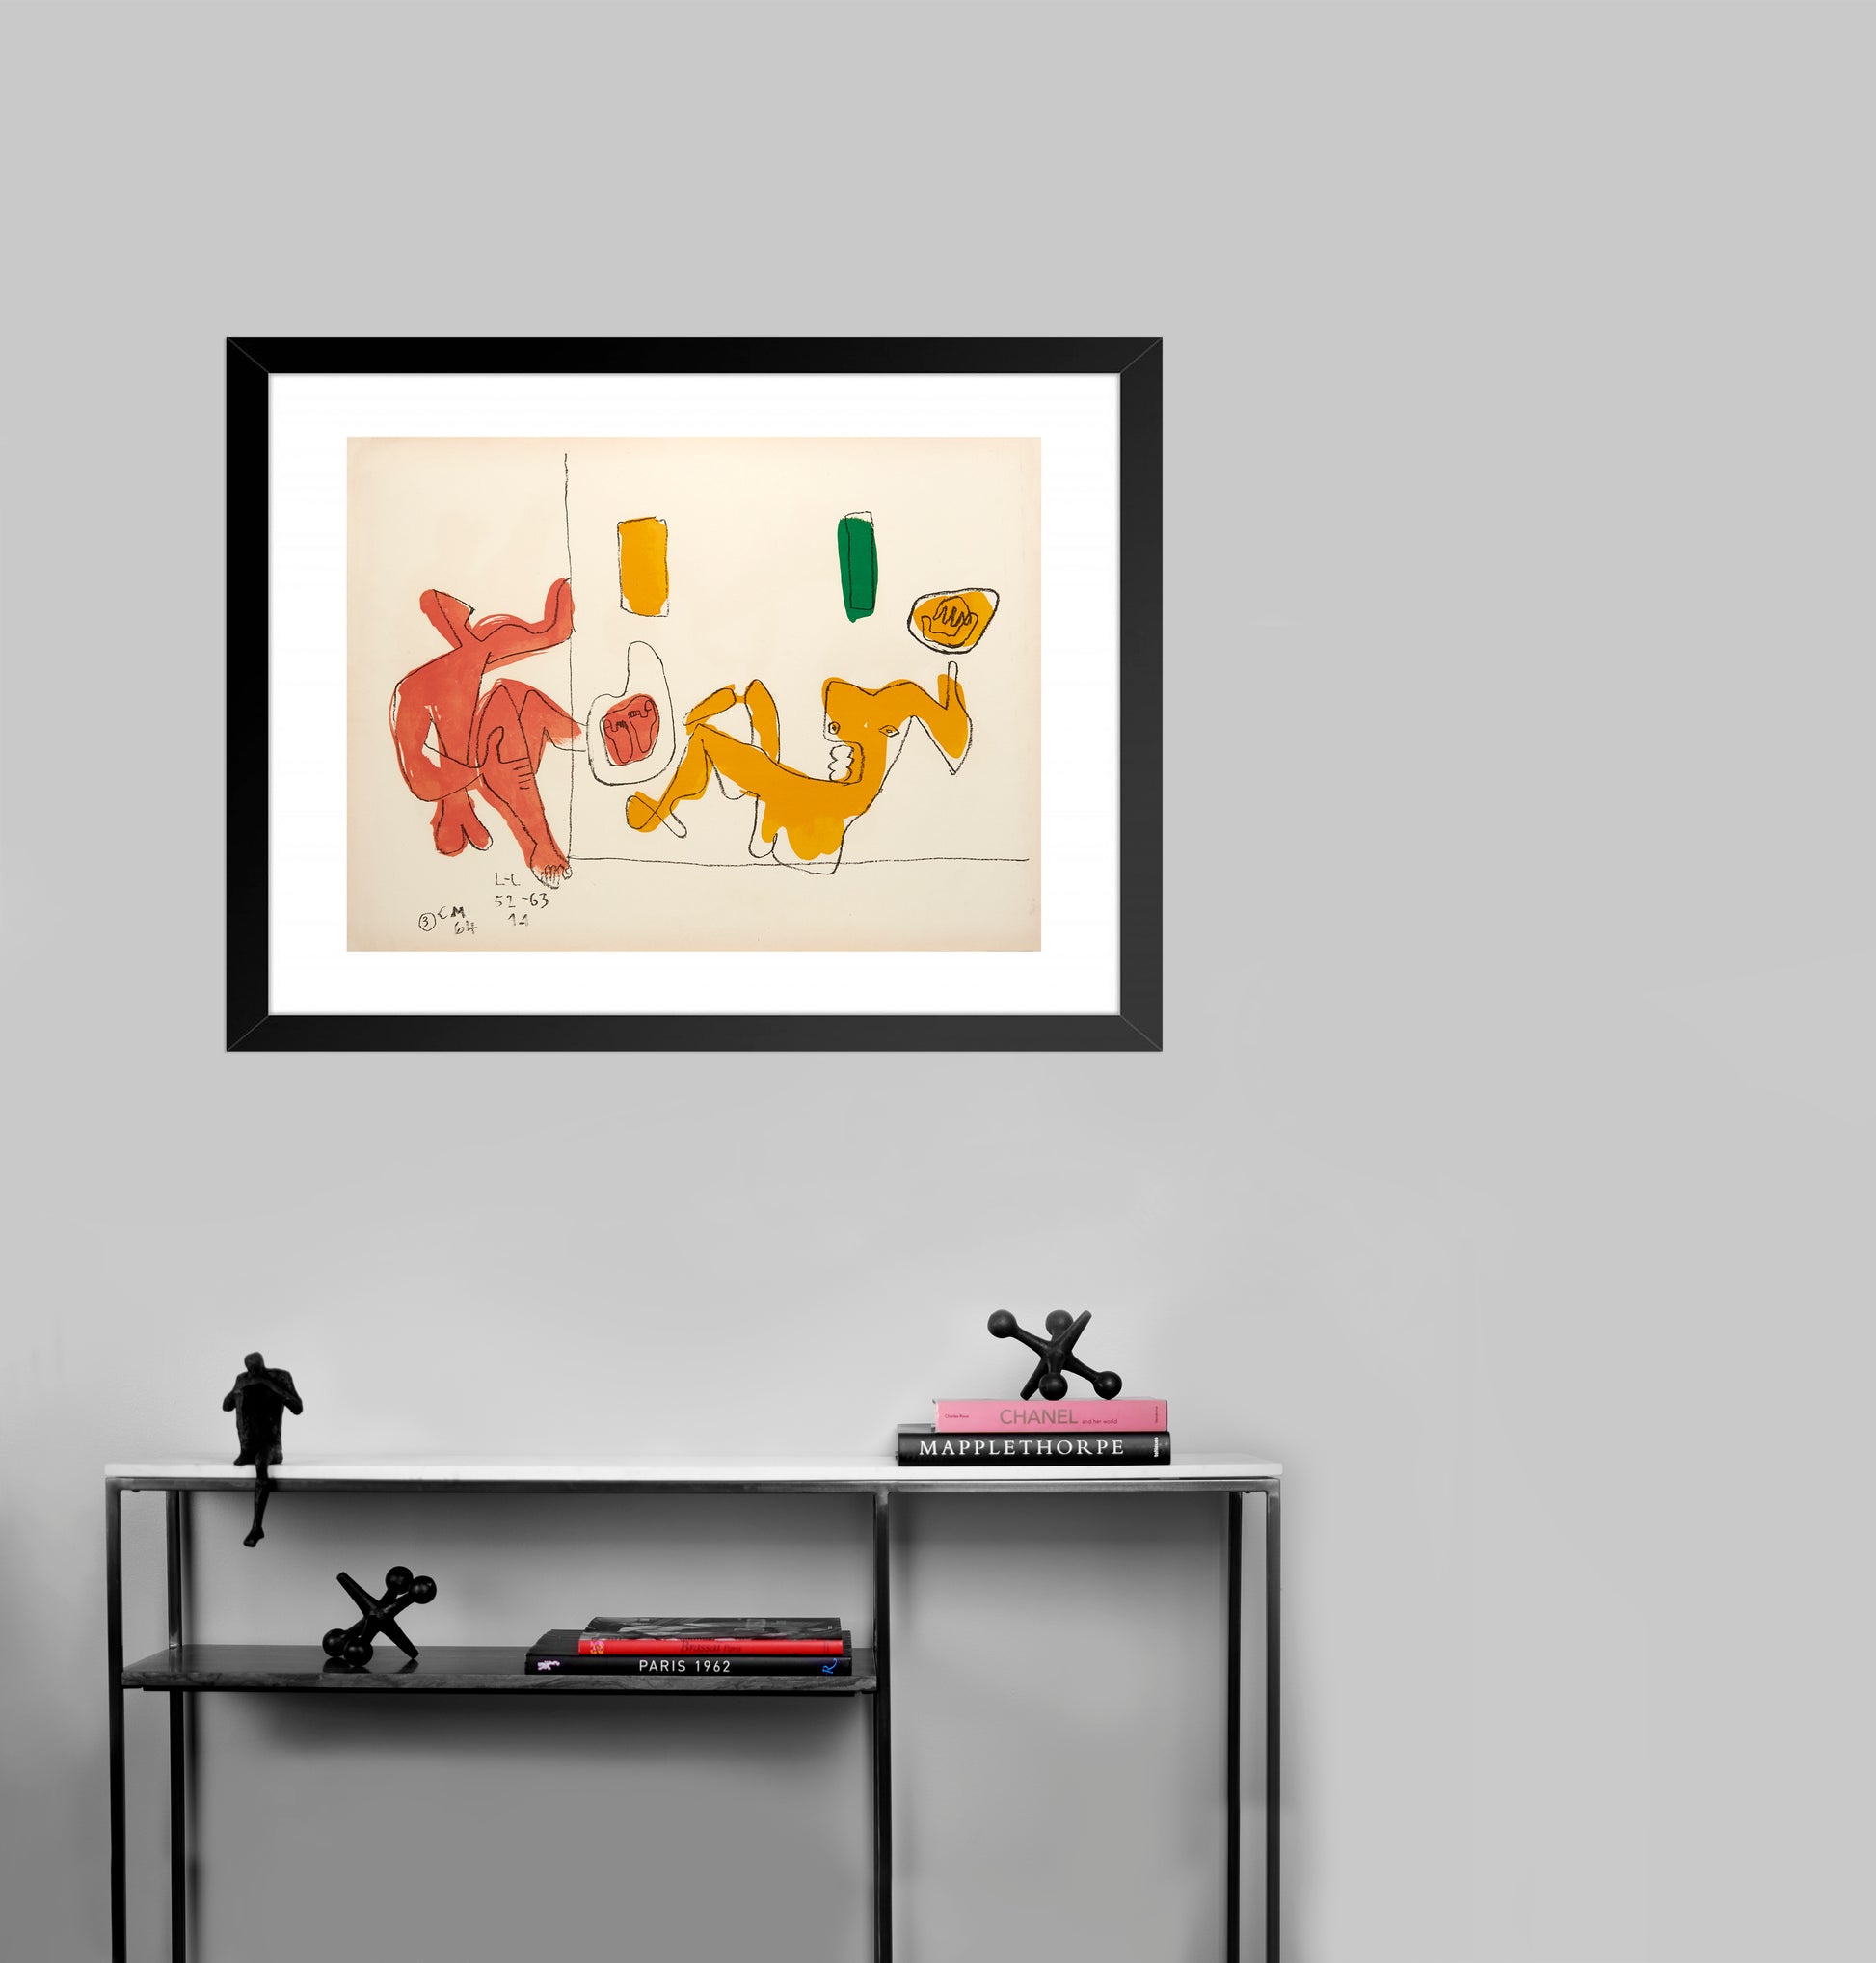 Touching their Feet by Le Corbusier - Mourlot Editions - Fine_Art - Poster - Lithograph - Wall Art - Vintage - Prints - Original